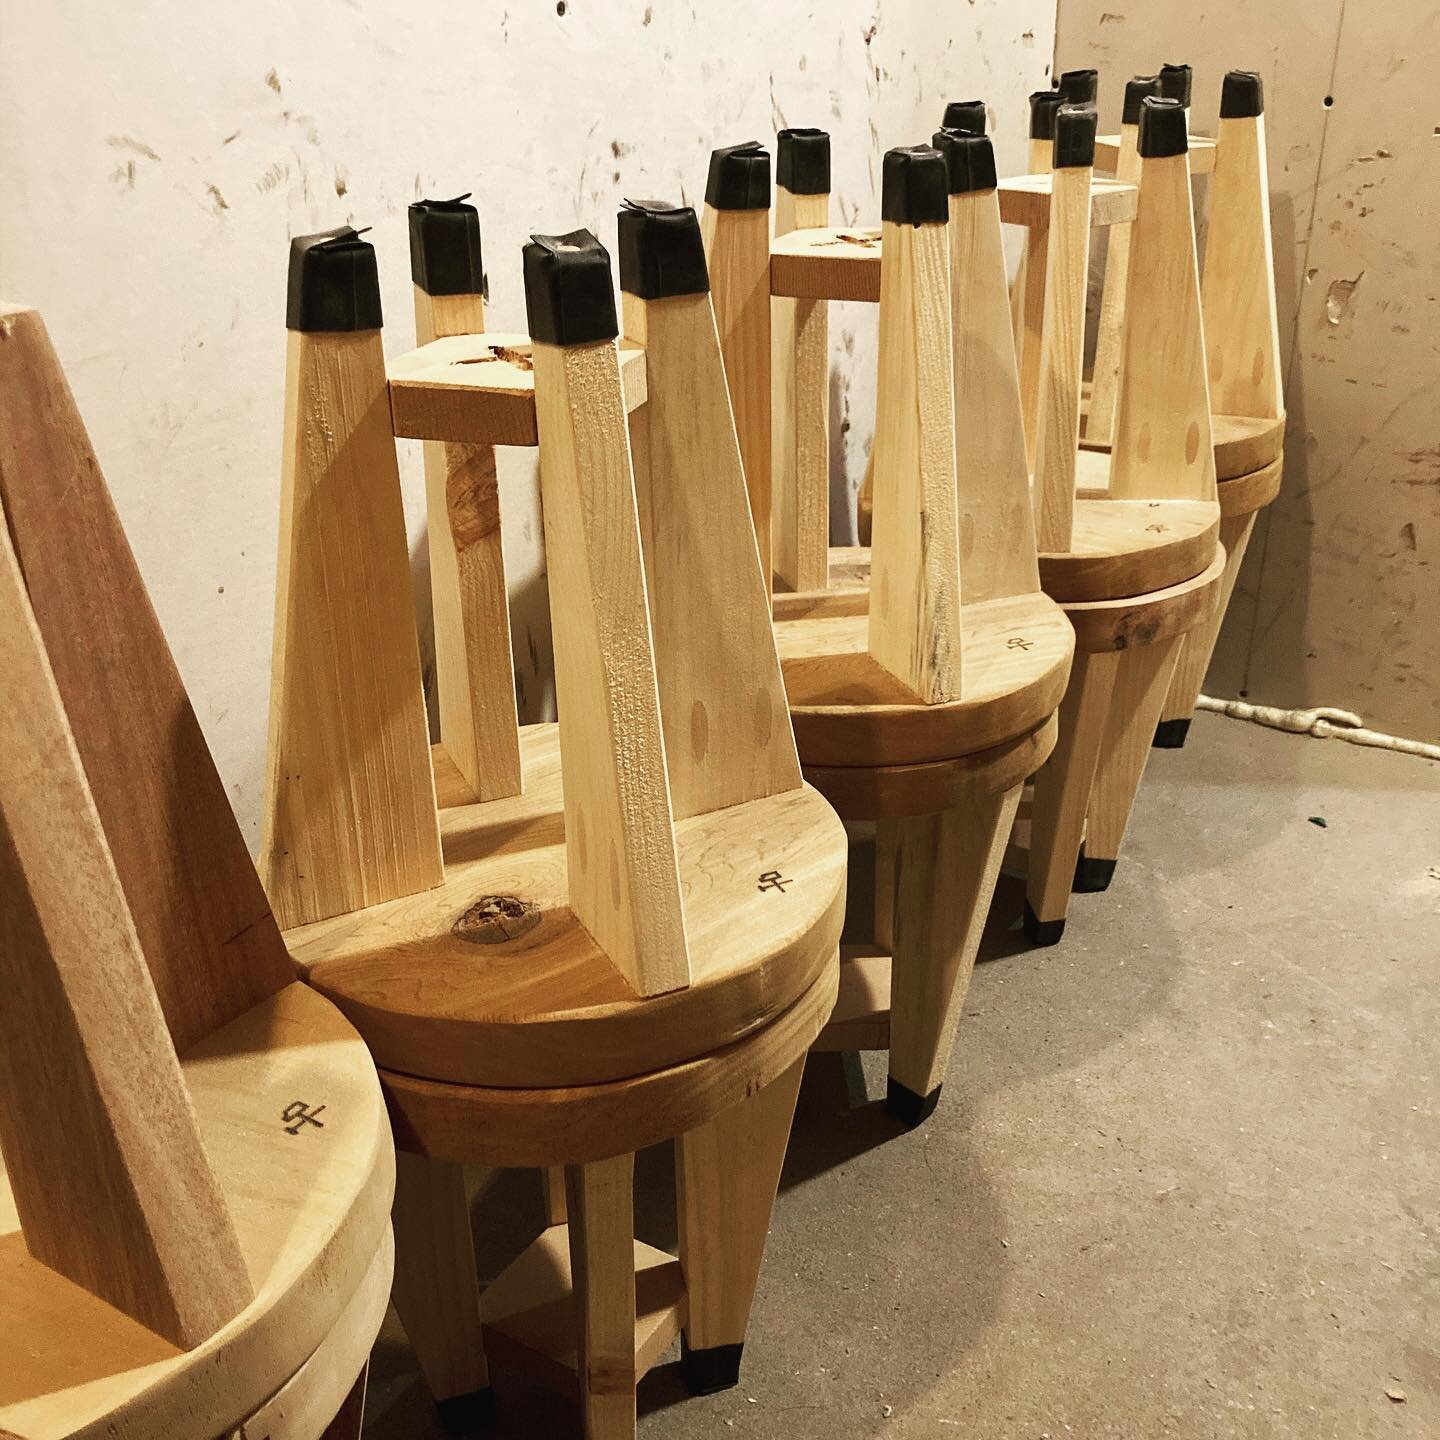 Stocked...... order at embercrafts.com  Stovestools.com  Local delivery and CASH price available!! ___________________________________________________ #newengland #newenglandcarpentry #work #handmade #custom #renovations #build #401 #rhodeisland #rho